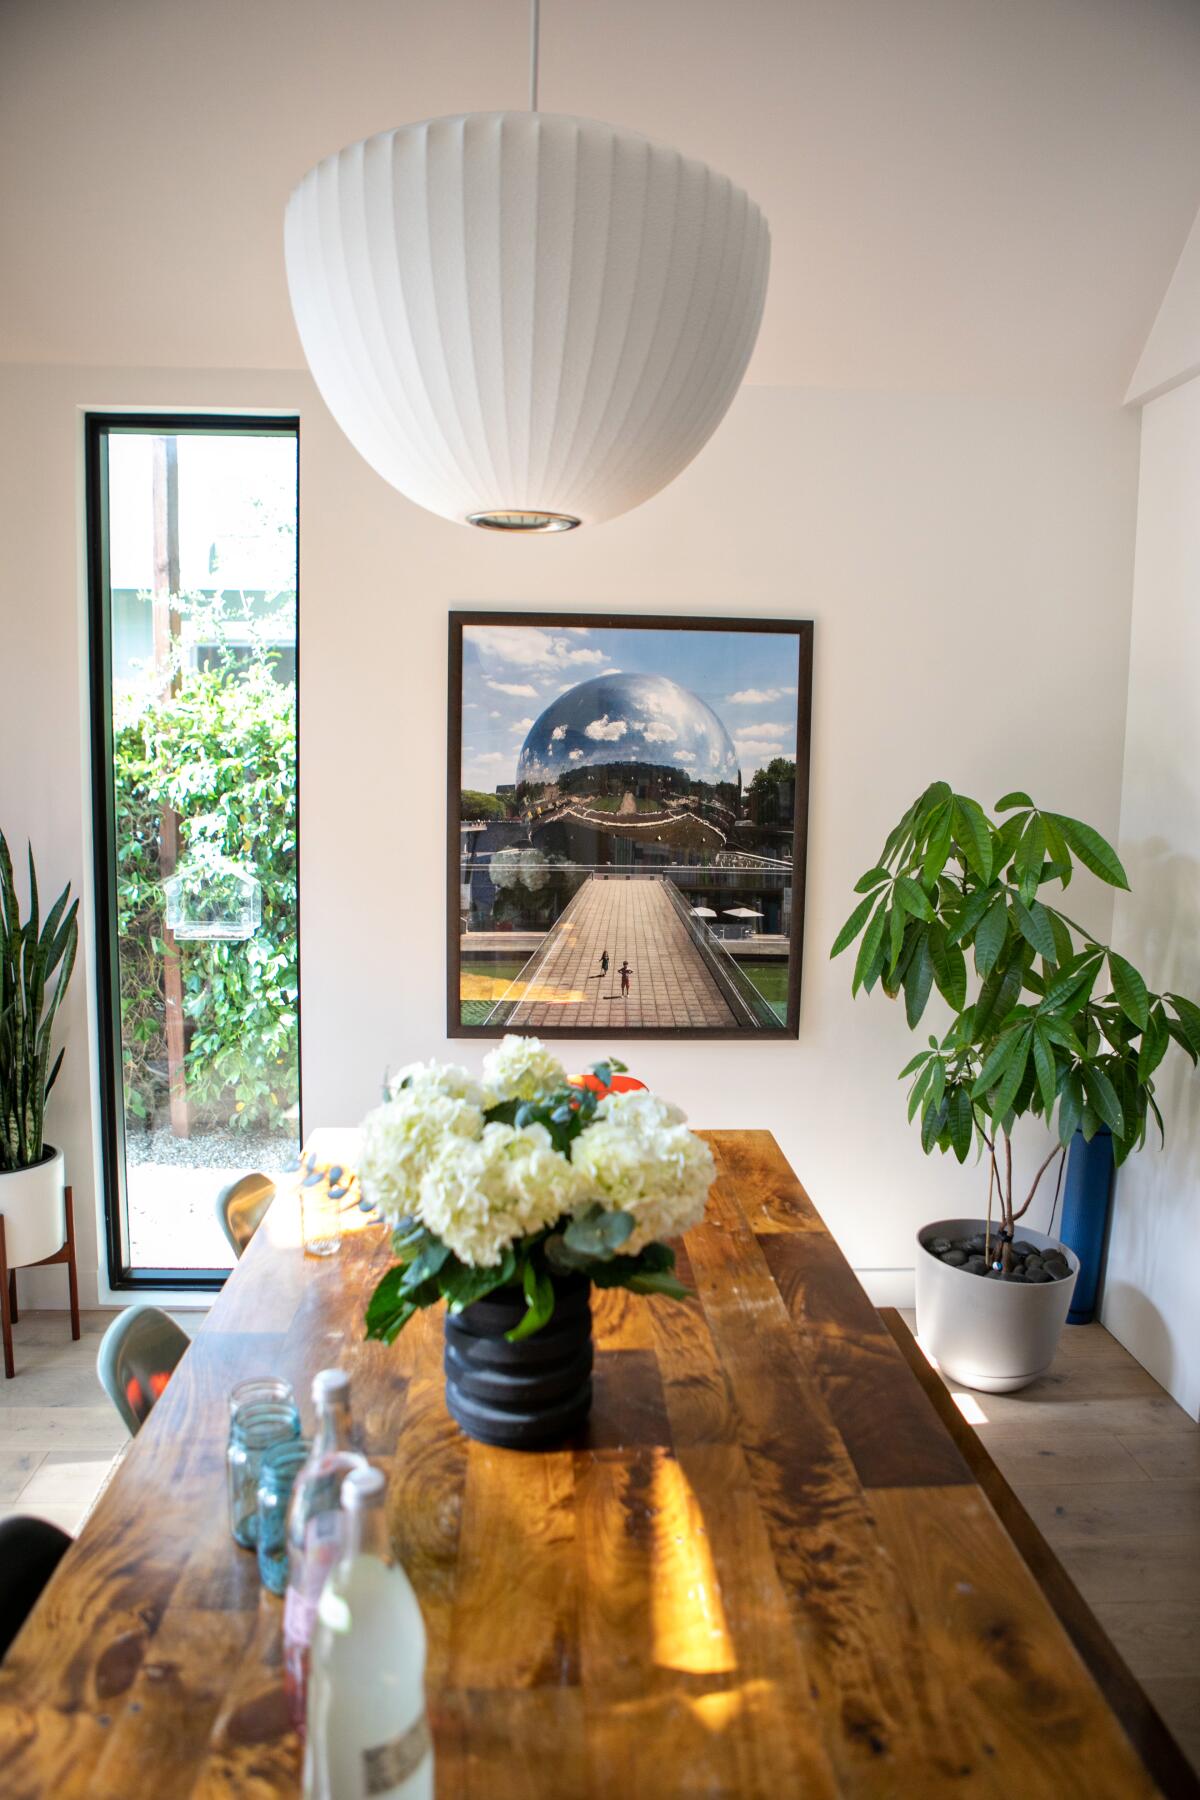 A wooden dining table with flowers on it, a bubble lamp above and a photo on the wall behind  